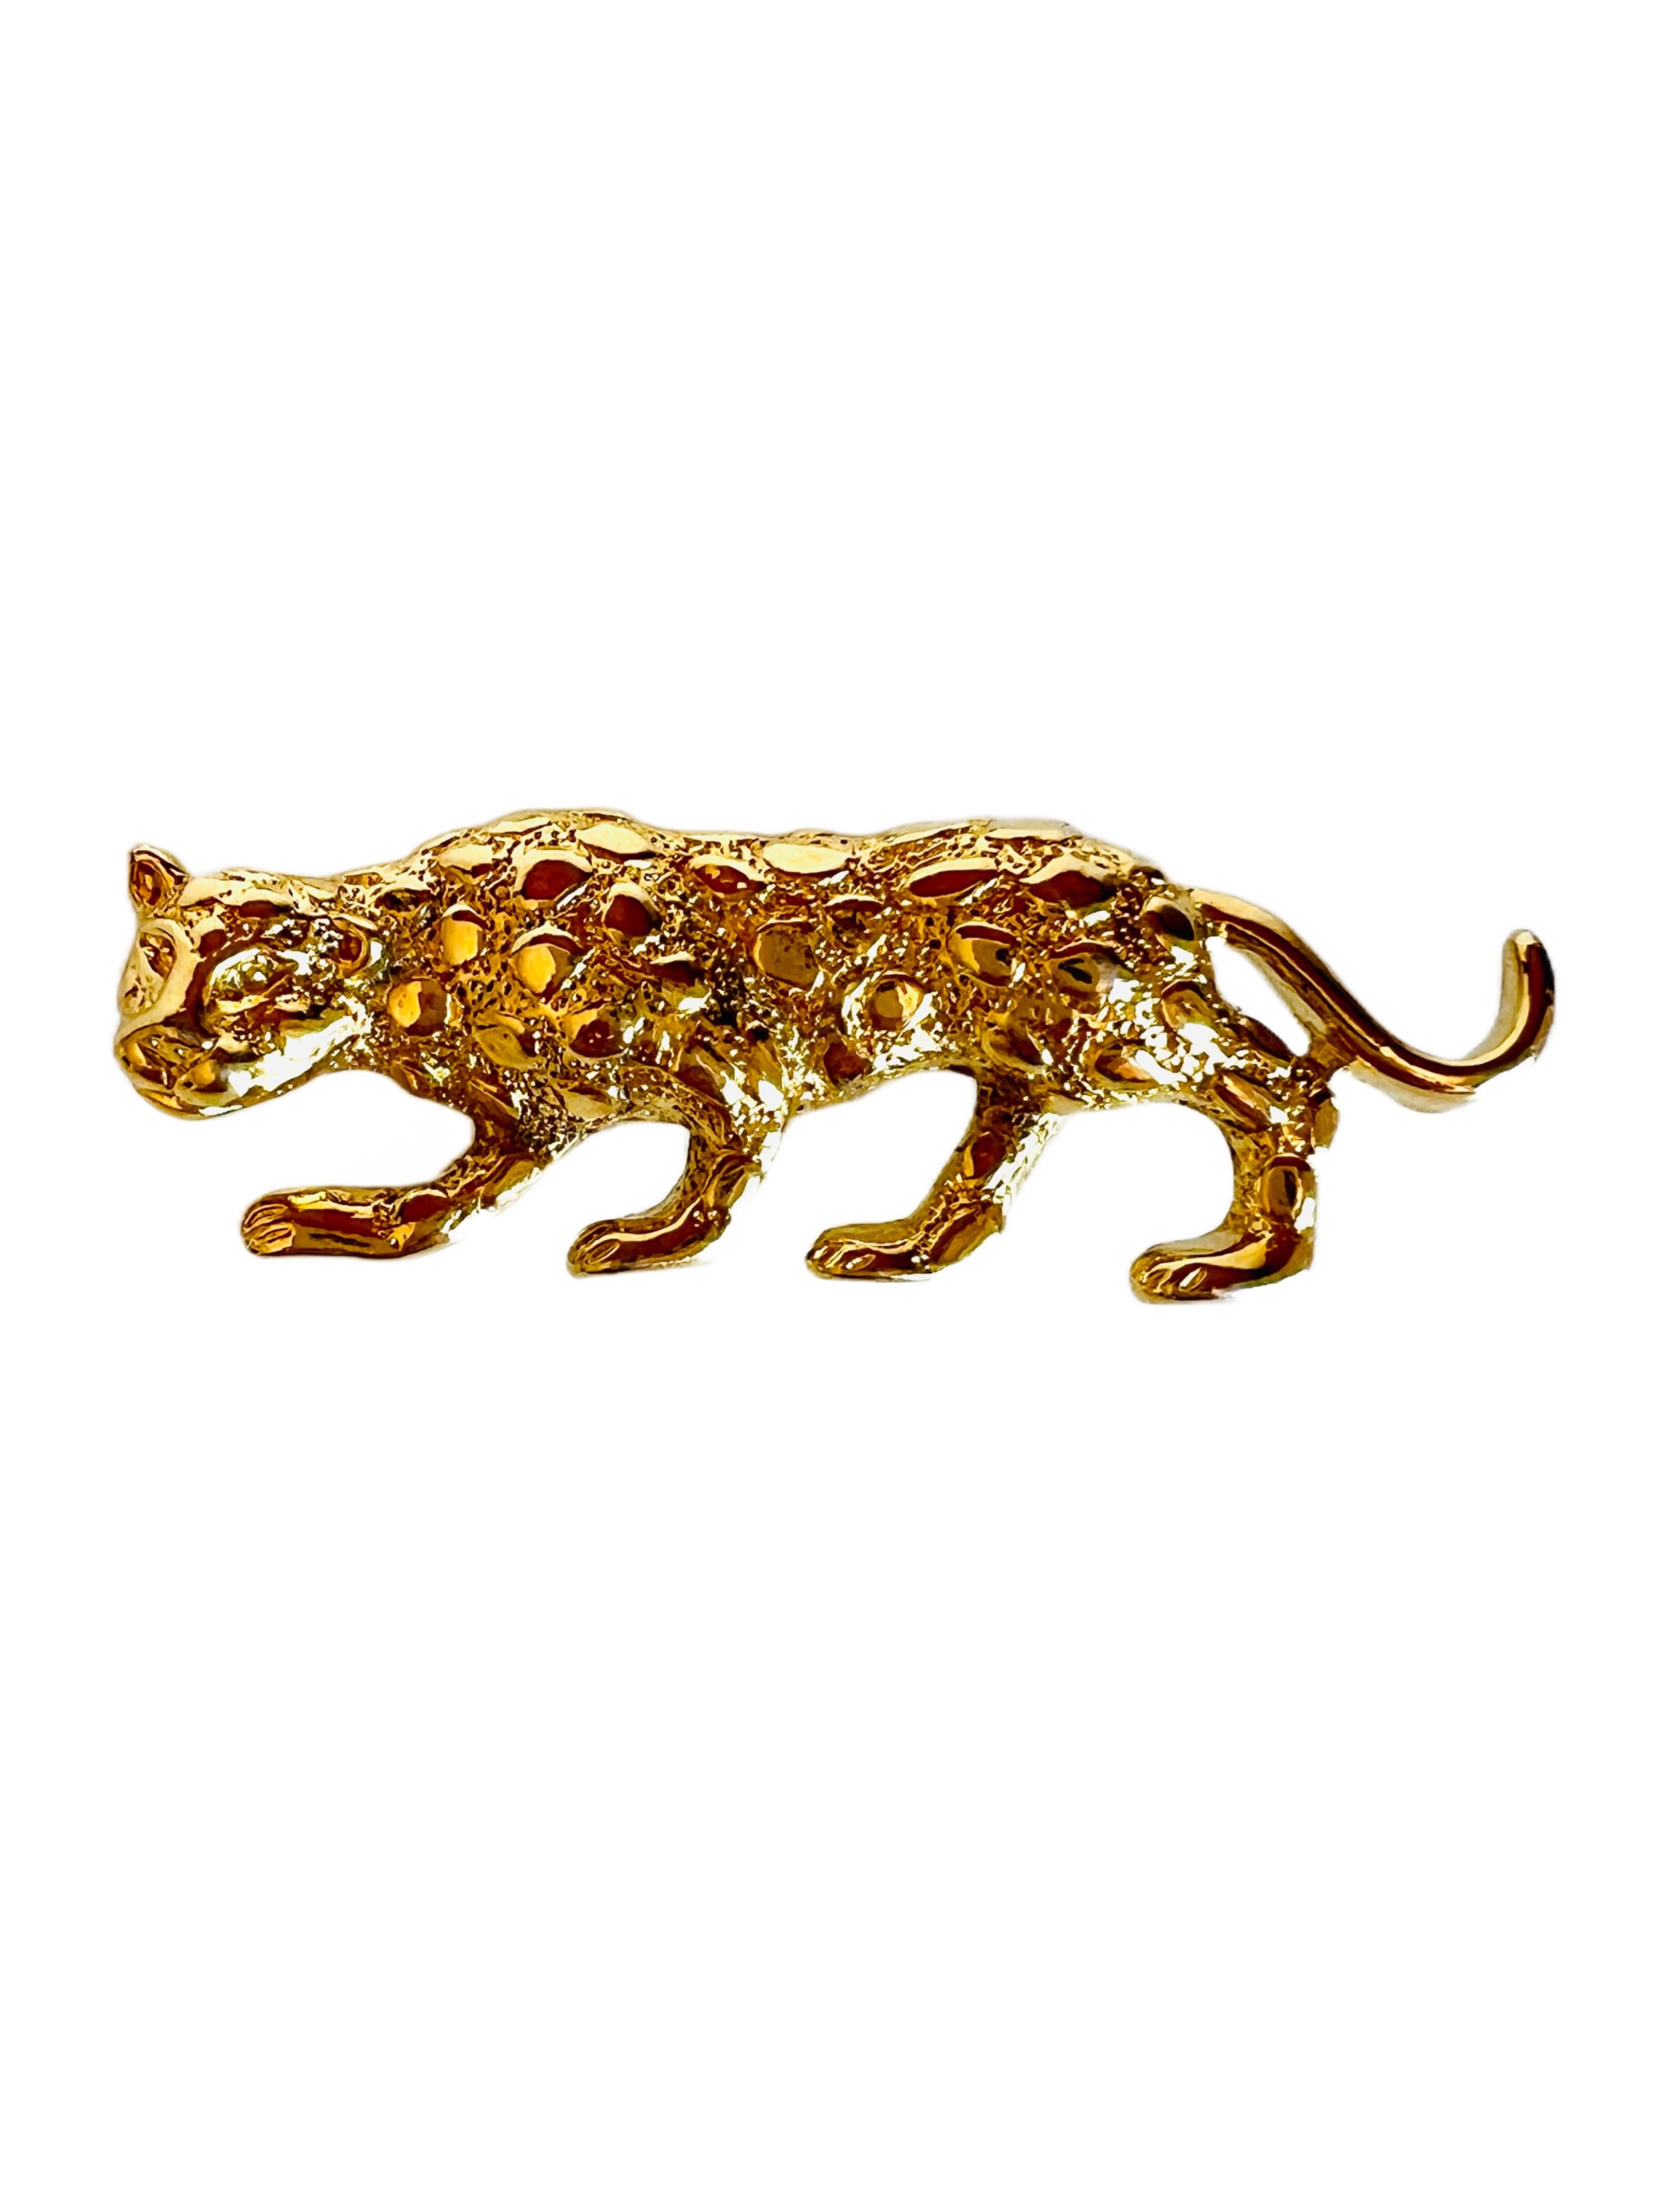 Broche vintage signée Gerry's figural crouching leopard brooch. 

Taille : 2-1/4